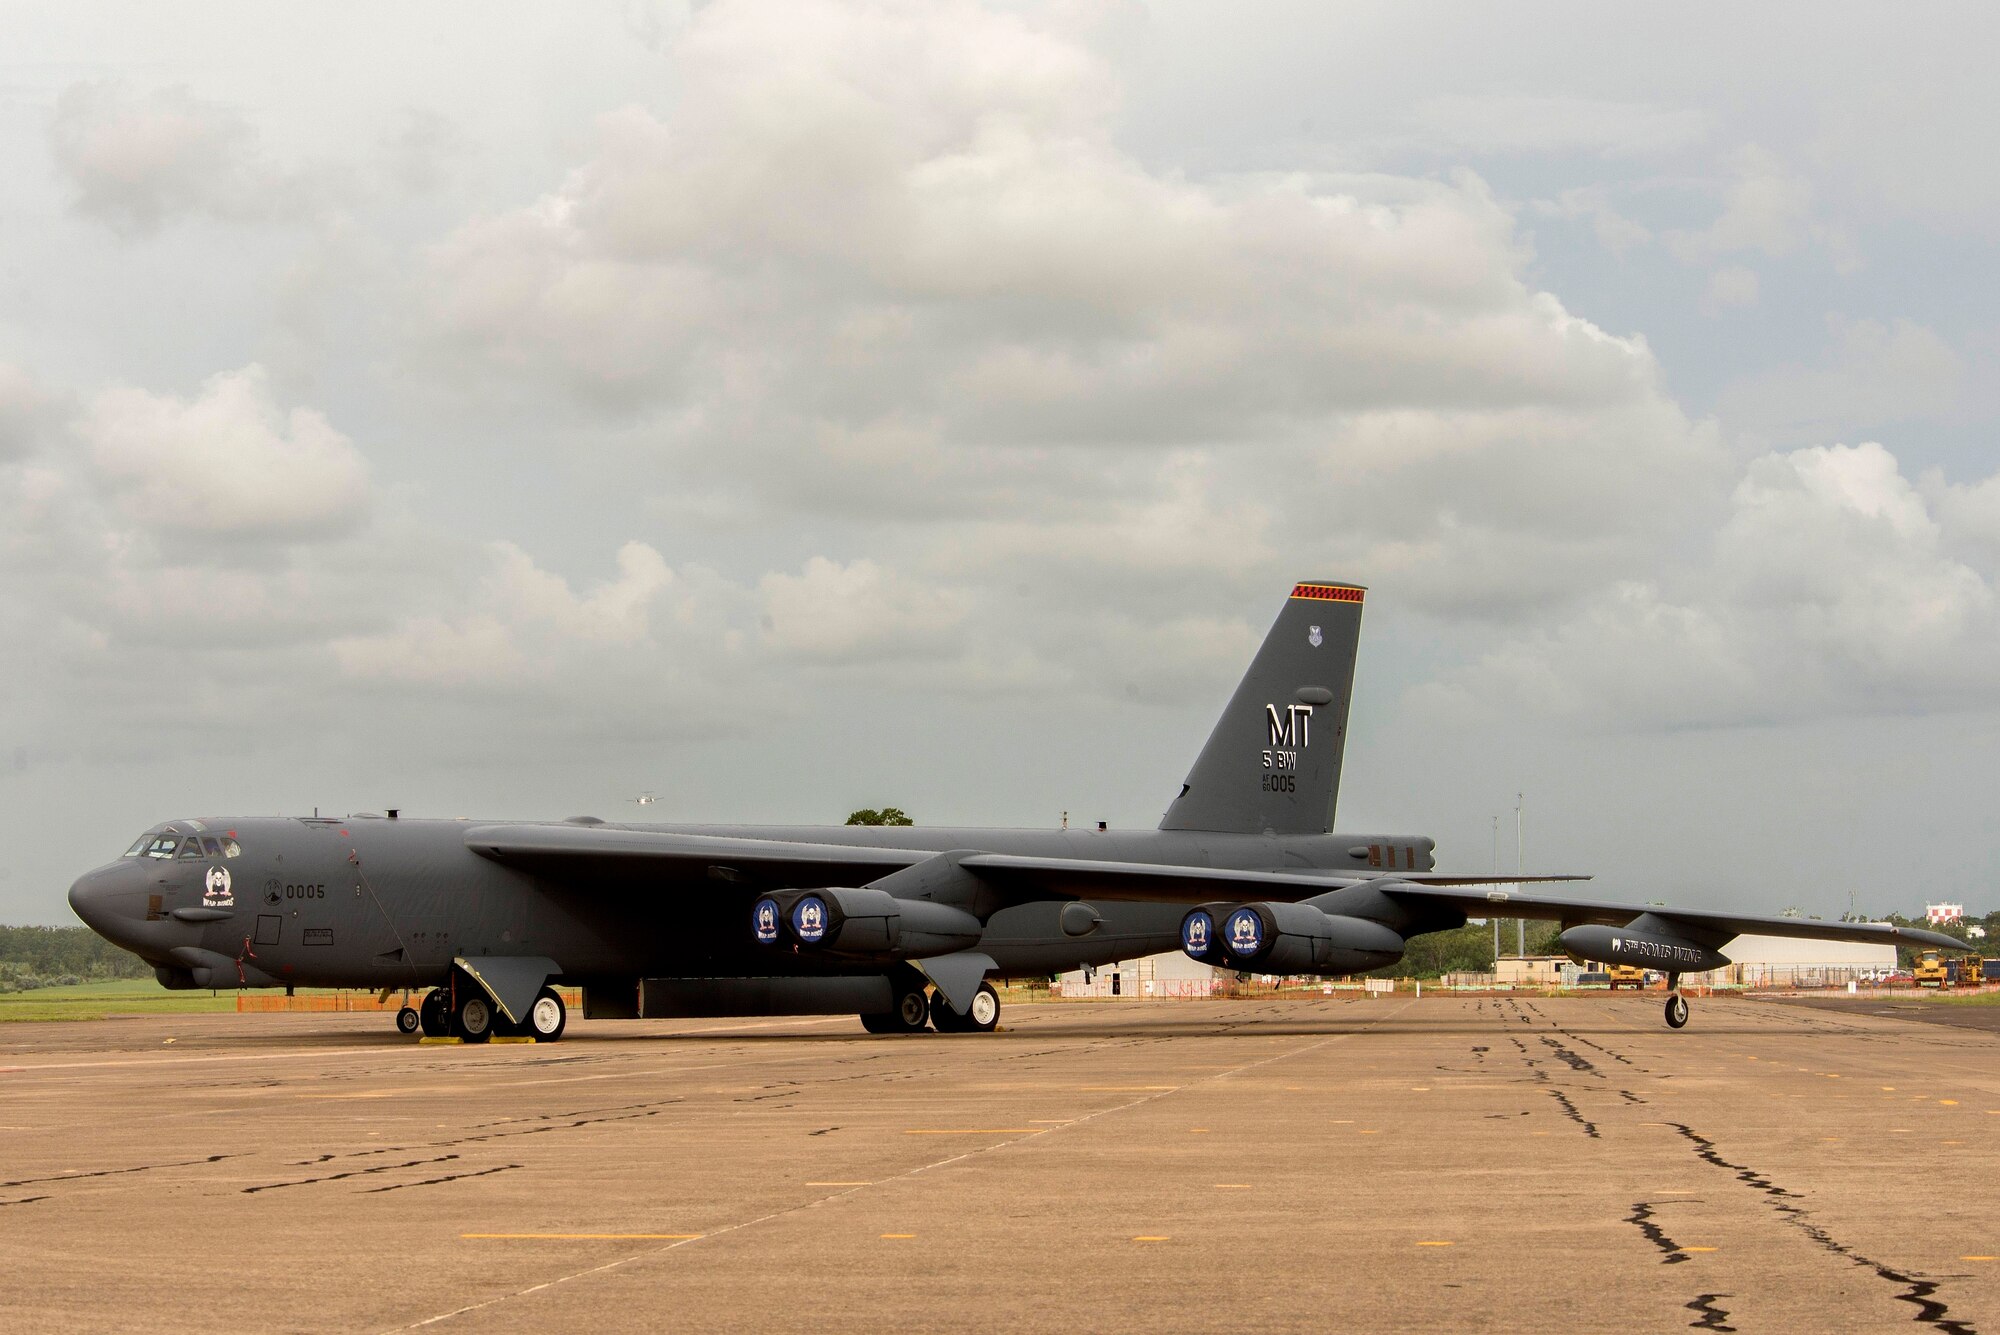 A U.S. Air Force B-52 Stratofortress sits on the runway following a sortie in support of Diamond Shield 2019 (DS-19) at Royal Australian Air Force Base Darwin, Australia, March 26, 2019.